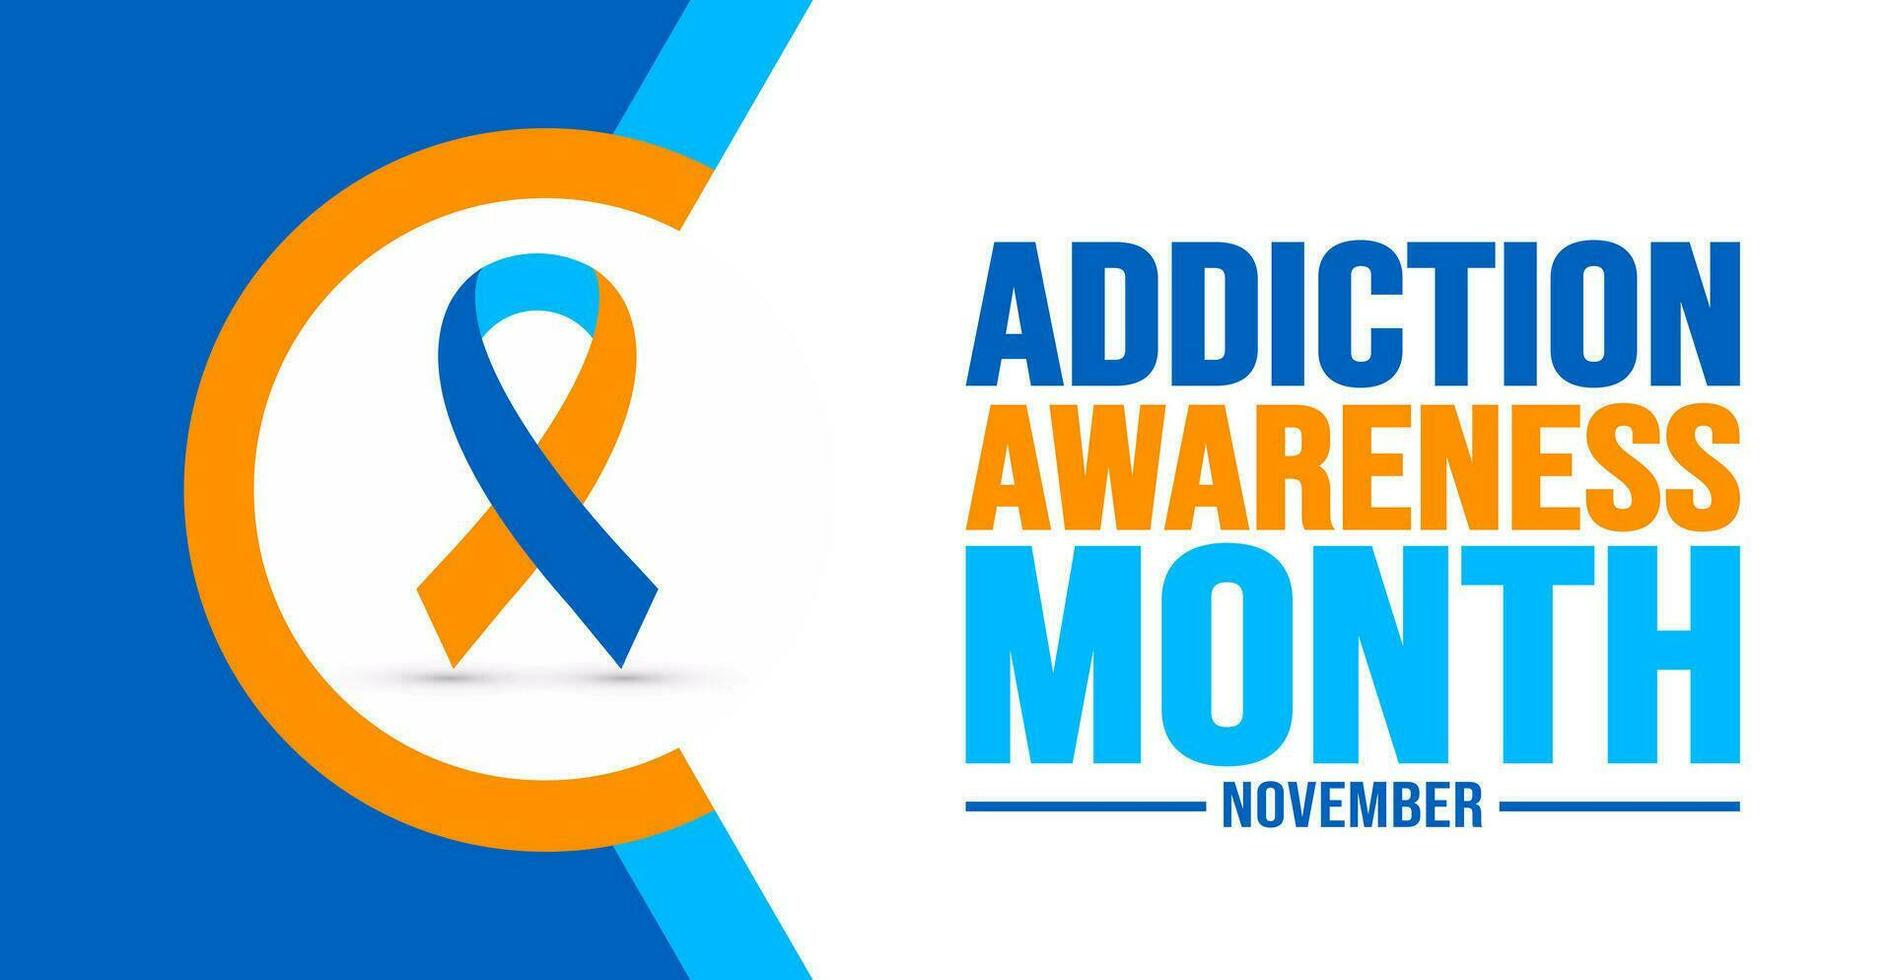 November is Addiction Awareness Month background template. Holiday concept. background, banner, placard, card, and poster design template with text inscription and standard color. vector illustration.